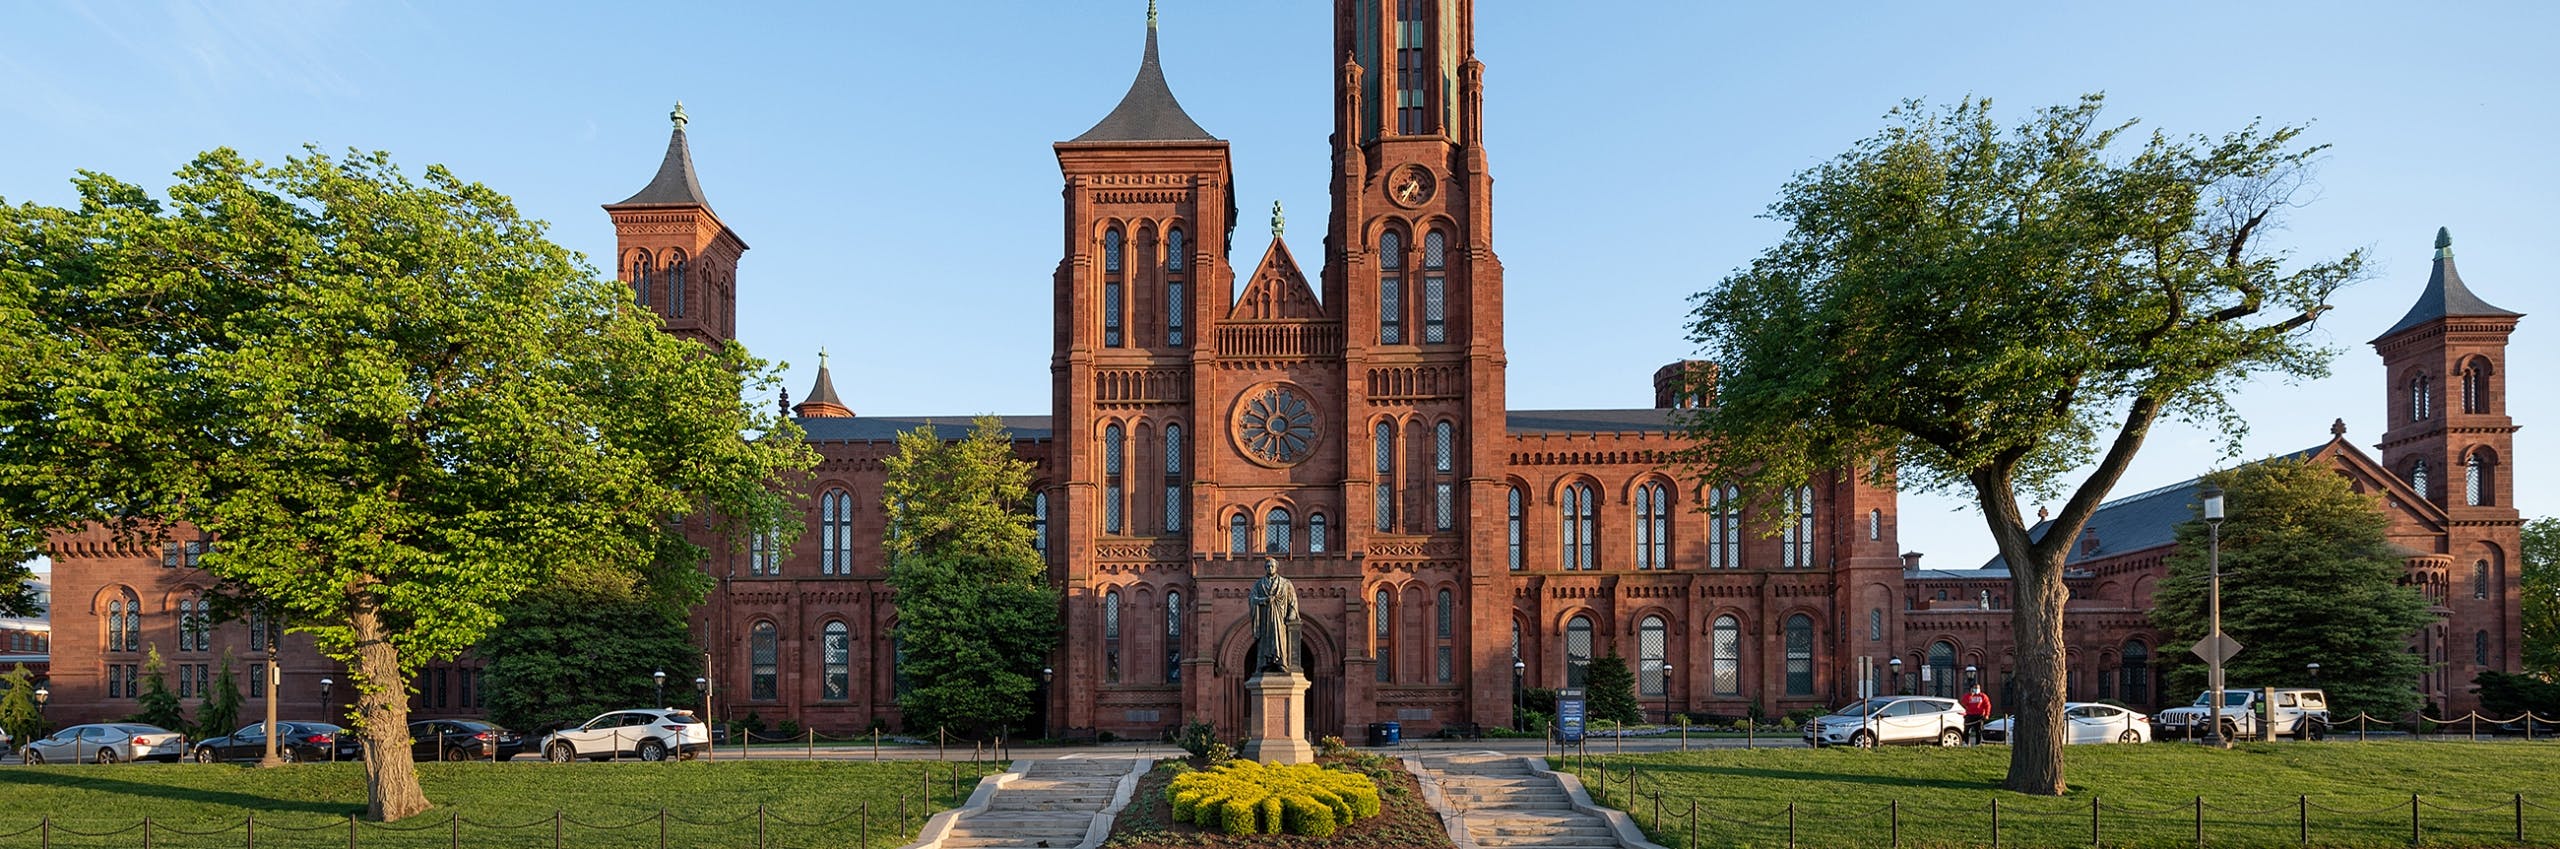 panoramic photo of the Smithsonian Castle building